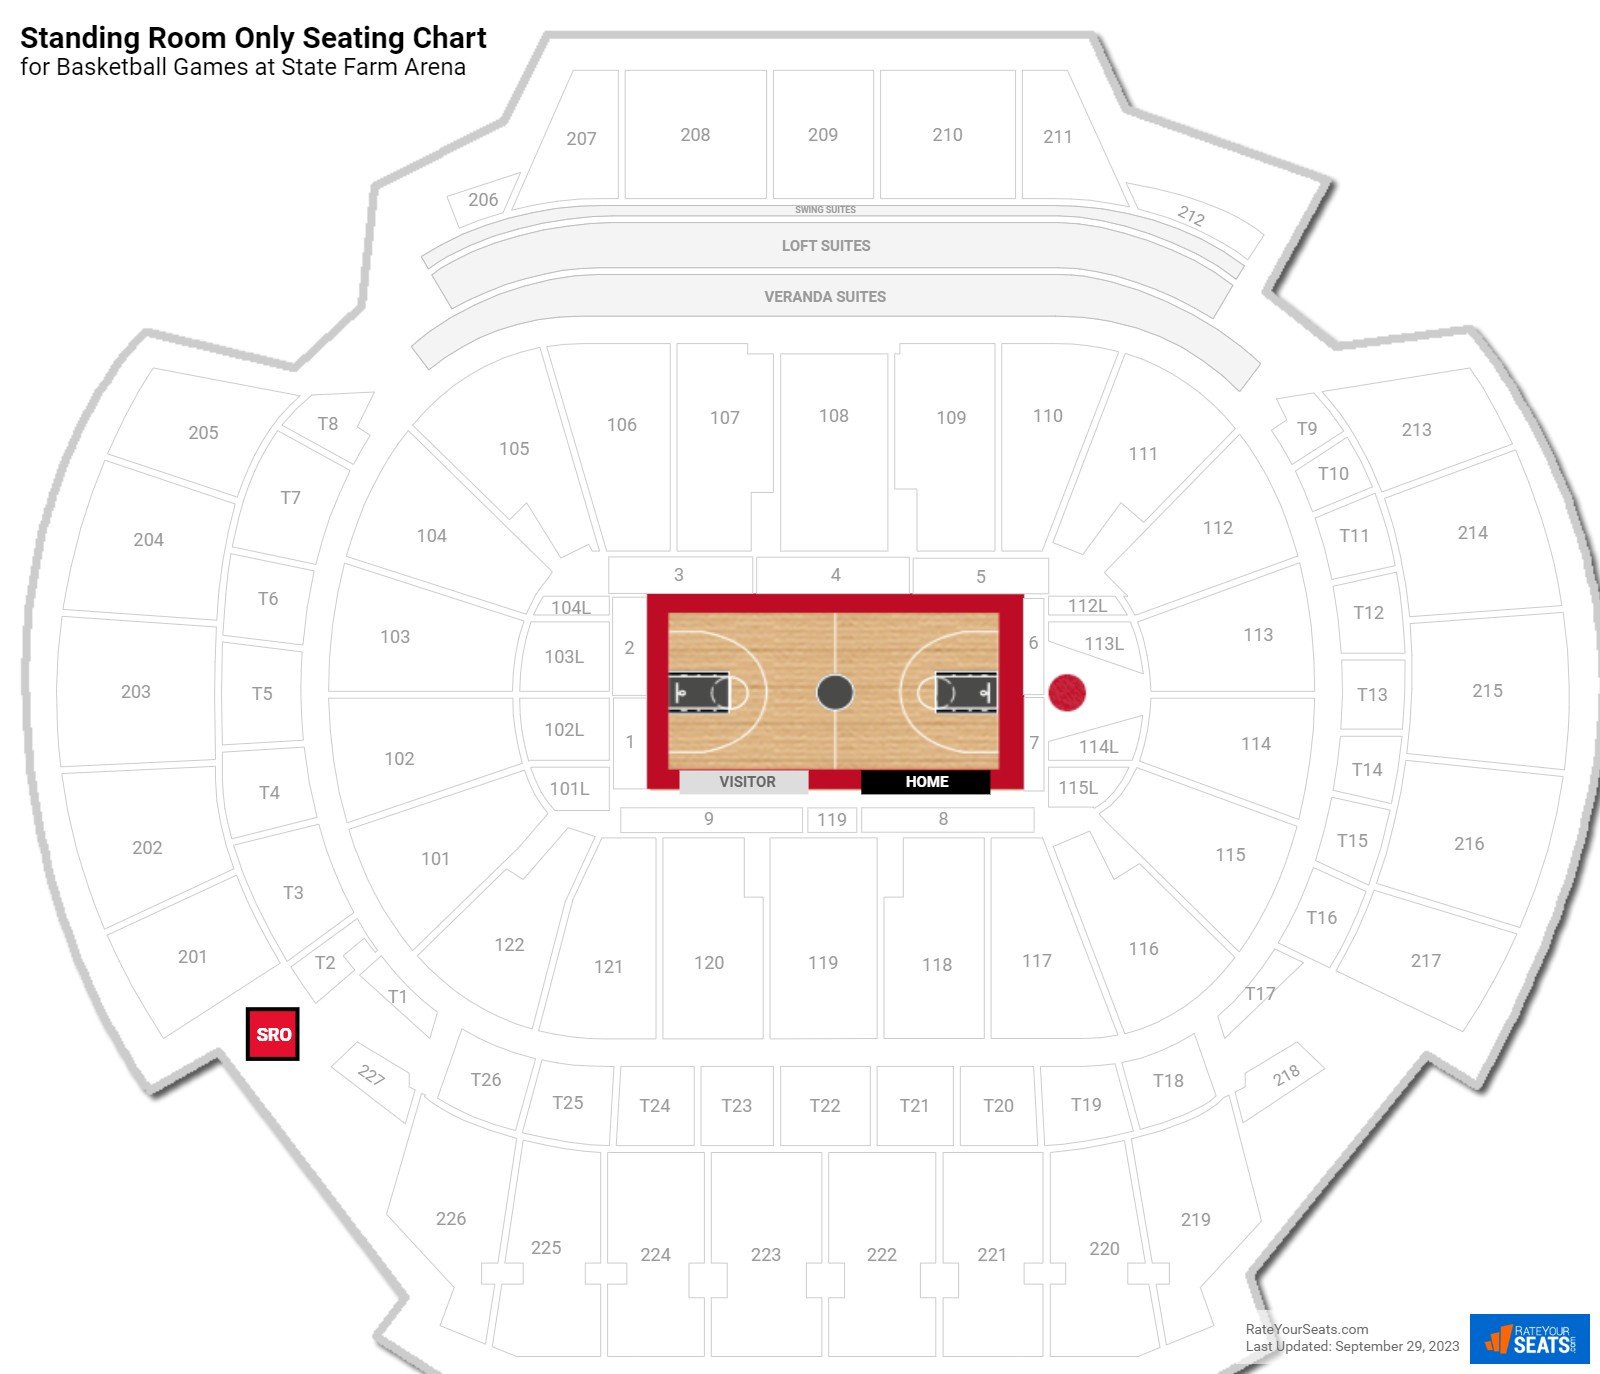 Basketball Standing Room Only Seating Chart at State Farm Arena